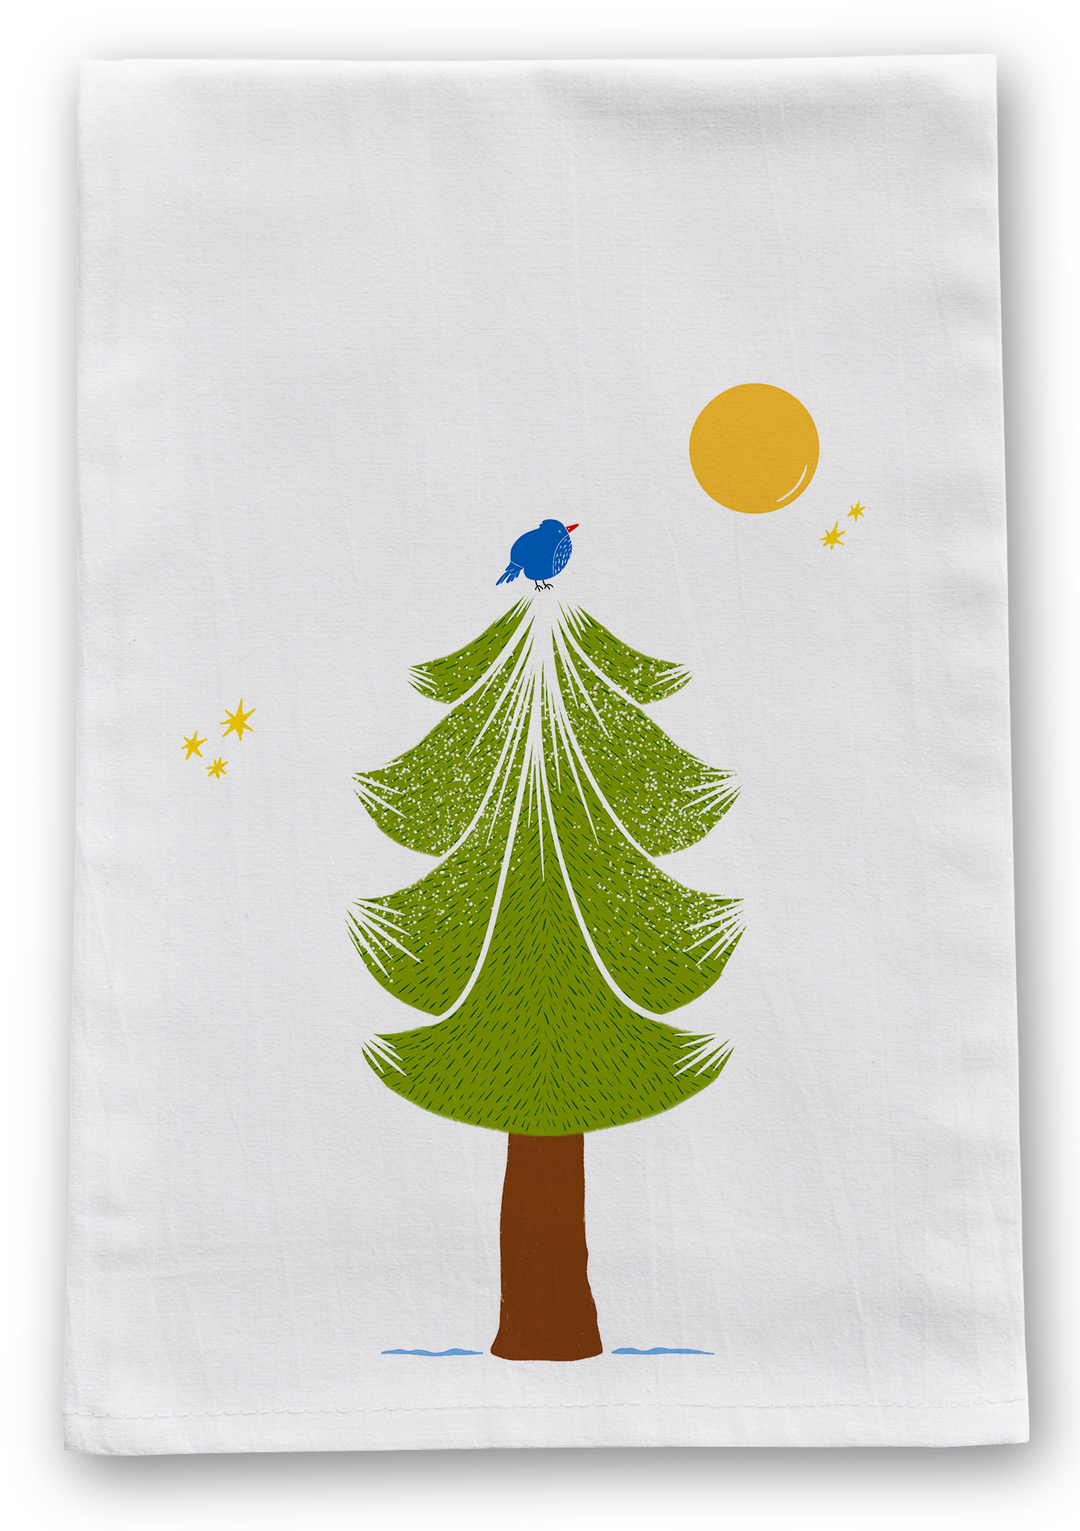 100% Organic Cotton "Pine Trees" Kitchen Tea Towels w. Hand-drawn Adorable Art - Assorted (Tea Time/Winter Forest)